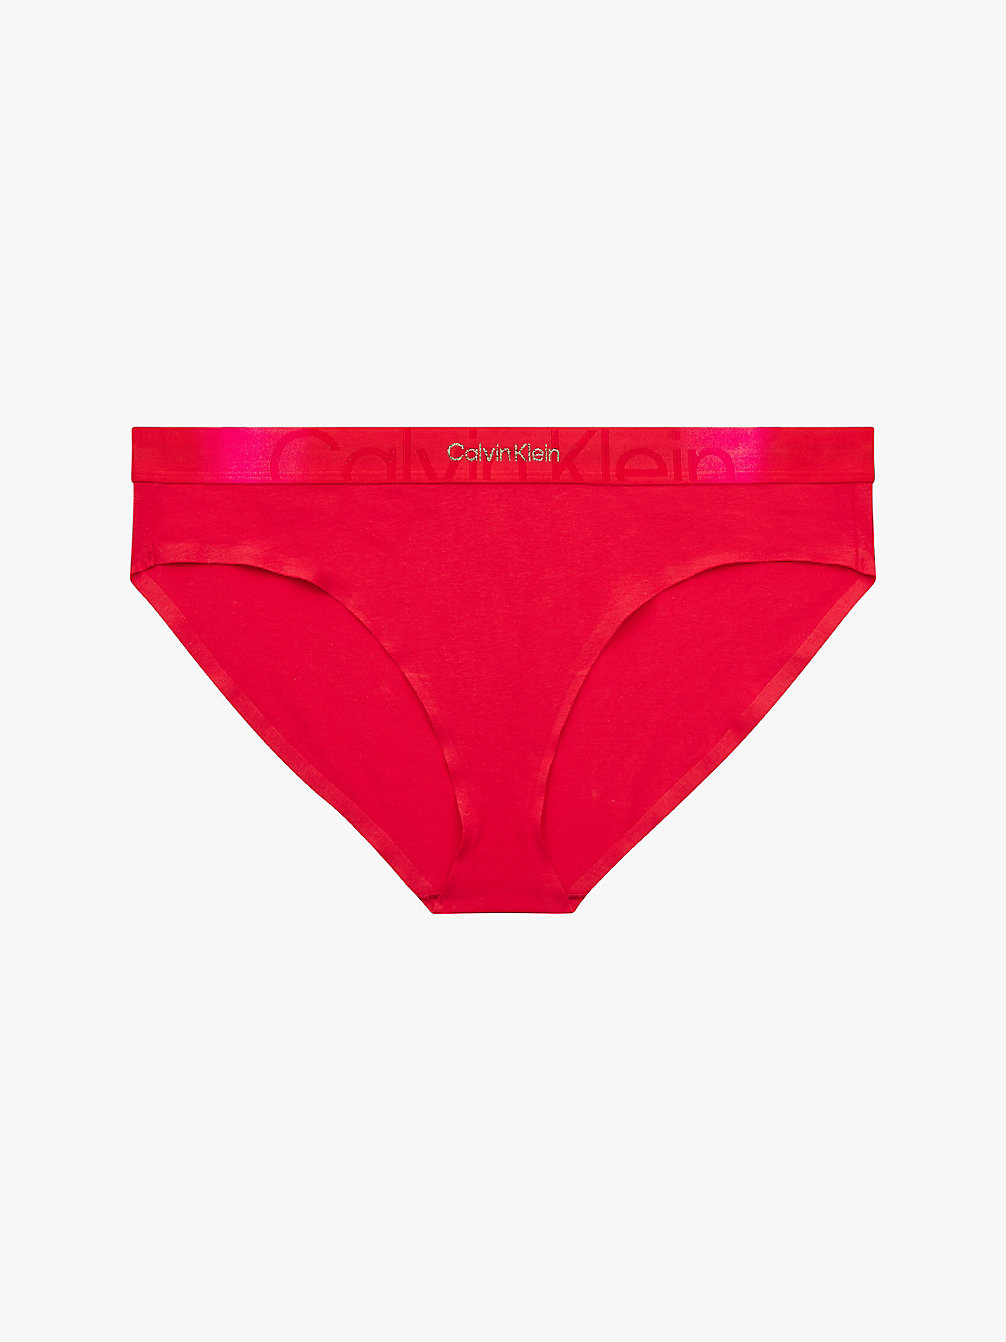 Culotte Grande Taille - Embossed Icon > EXACT > undefined femmes > Calvin Klein